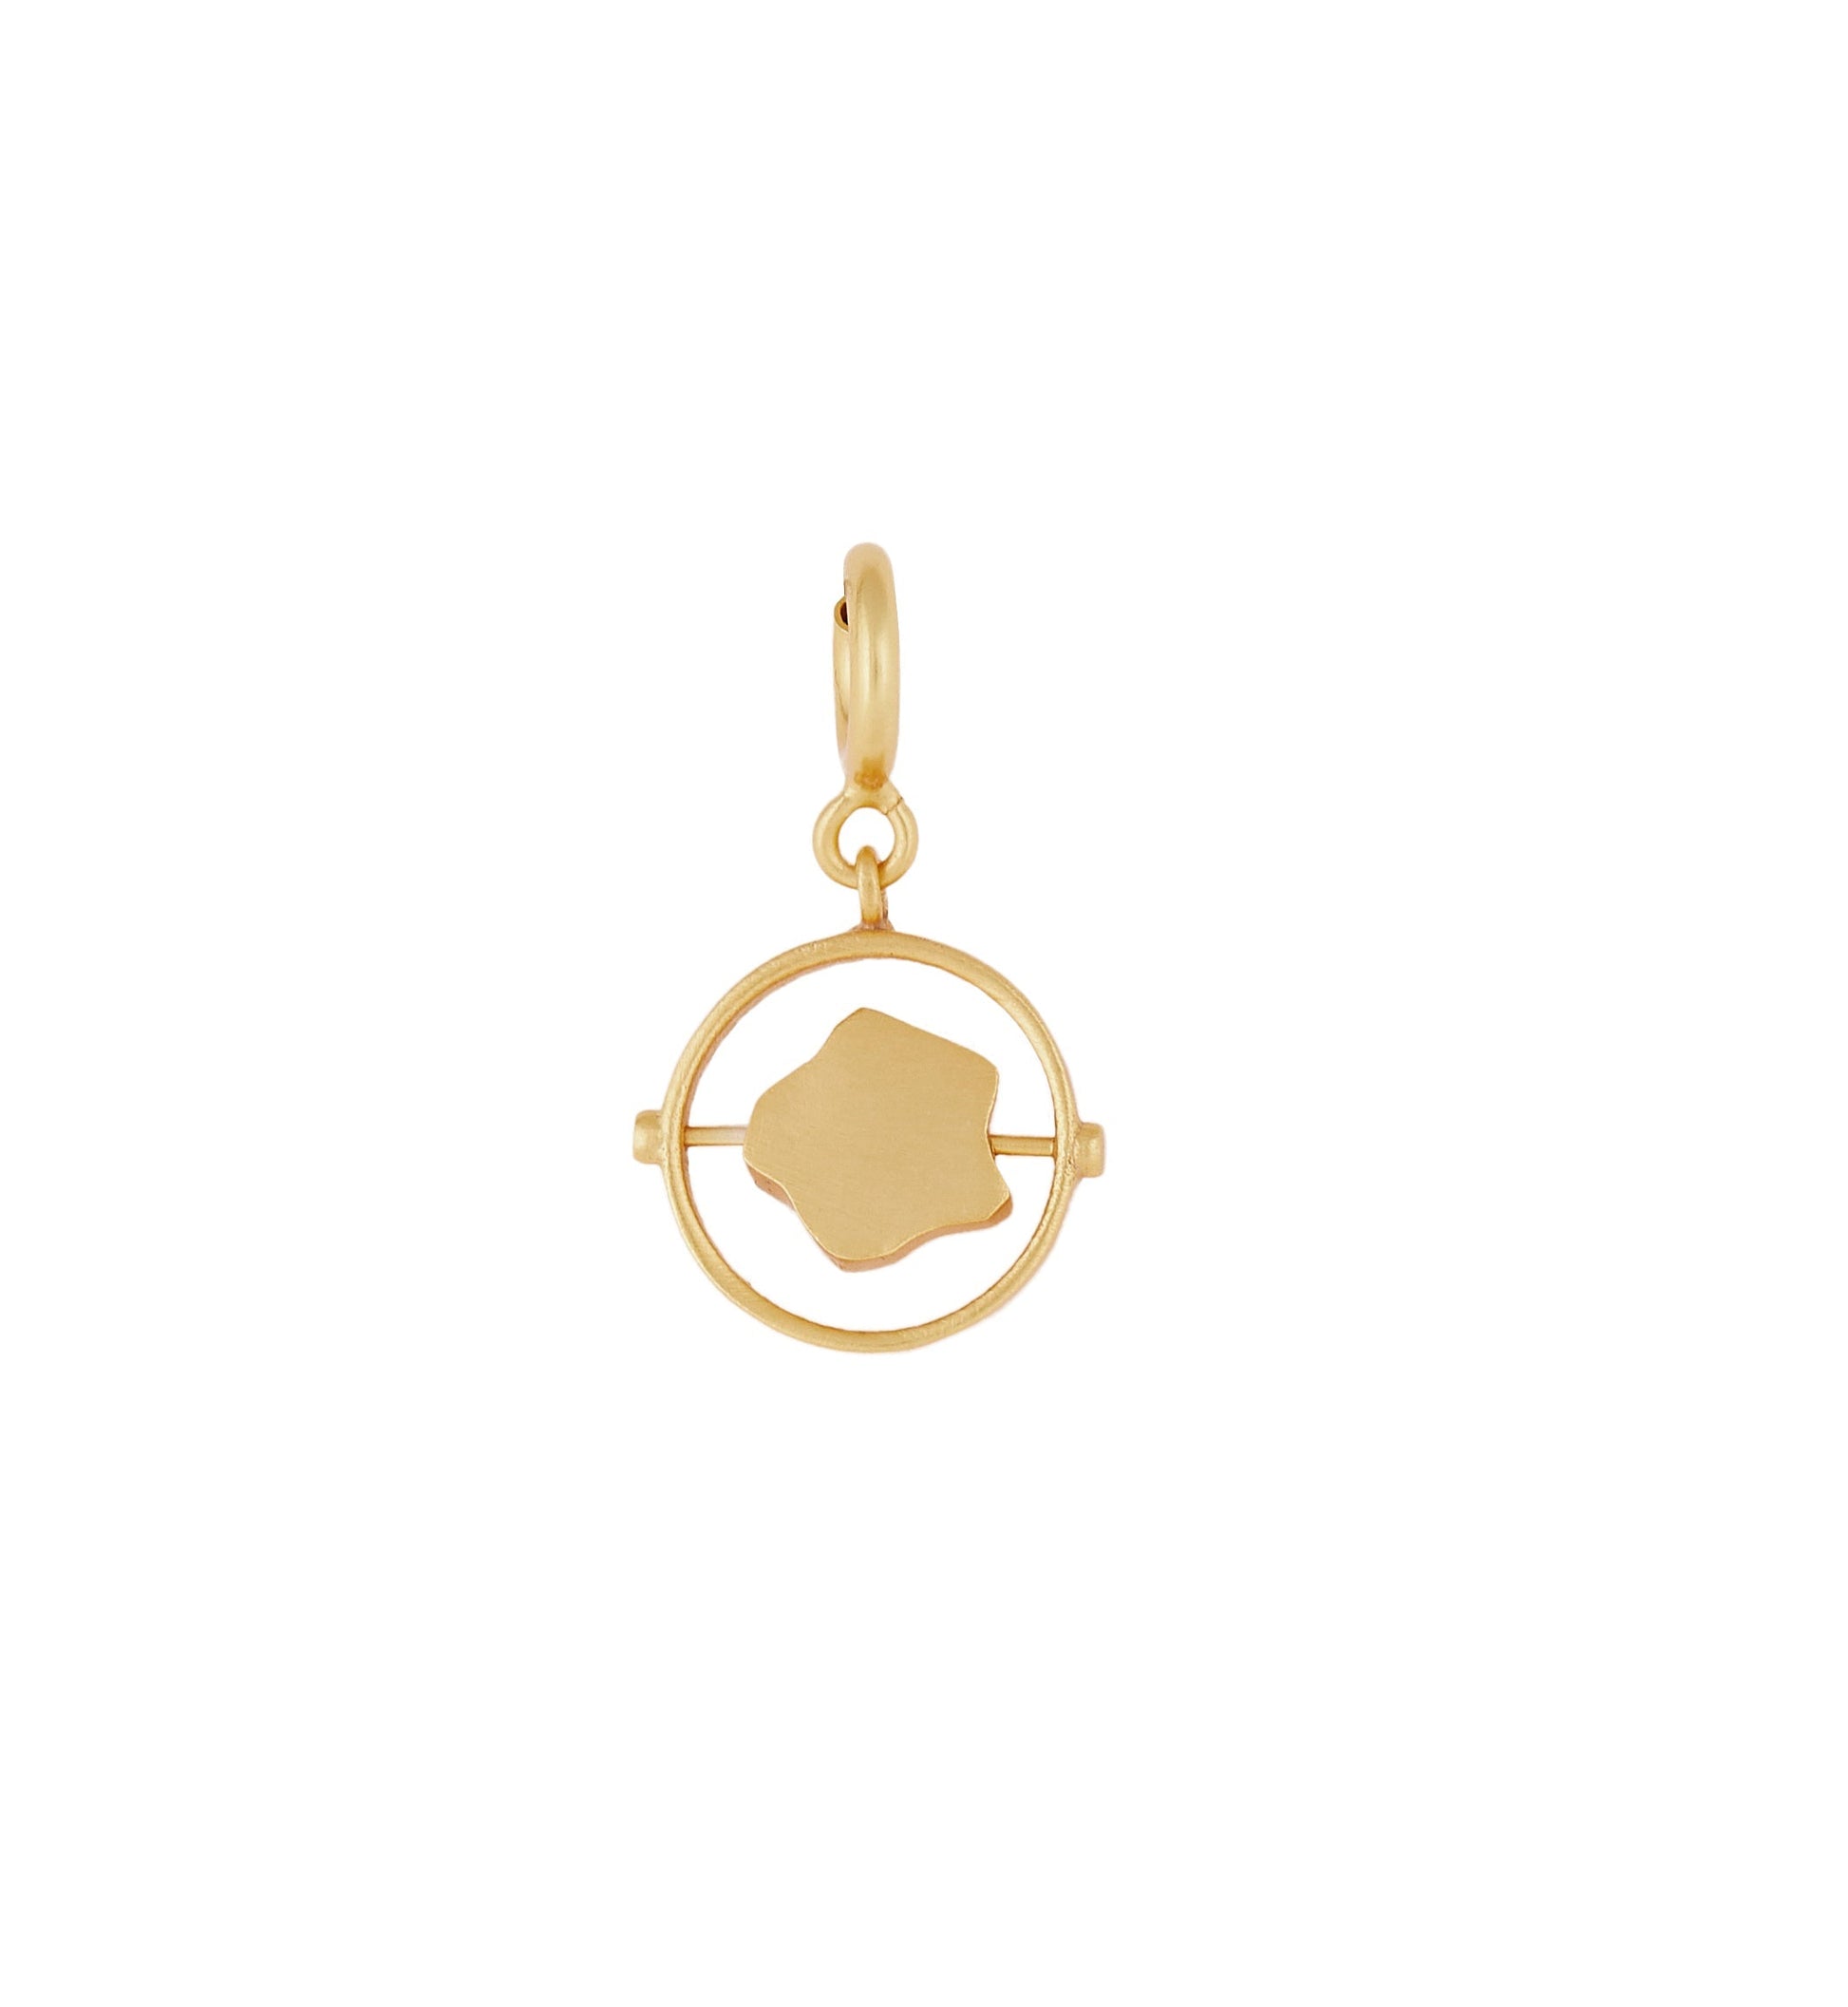 Wear Your Expressions Rotating Charm